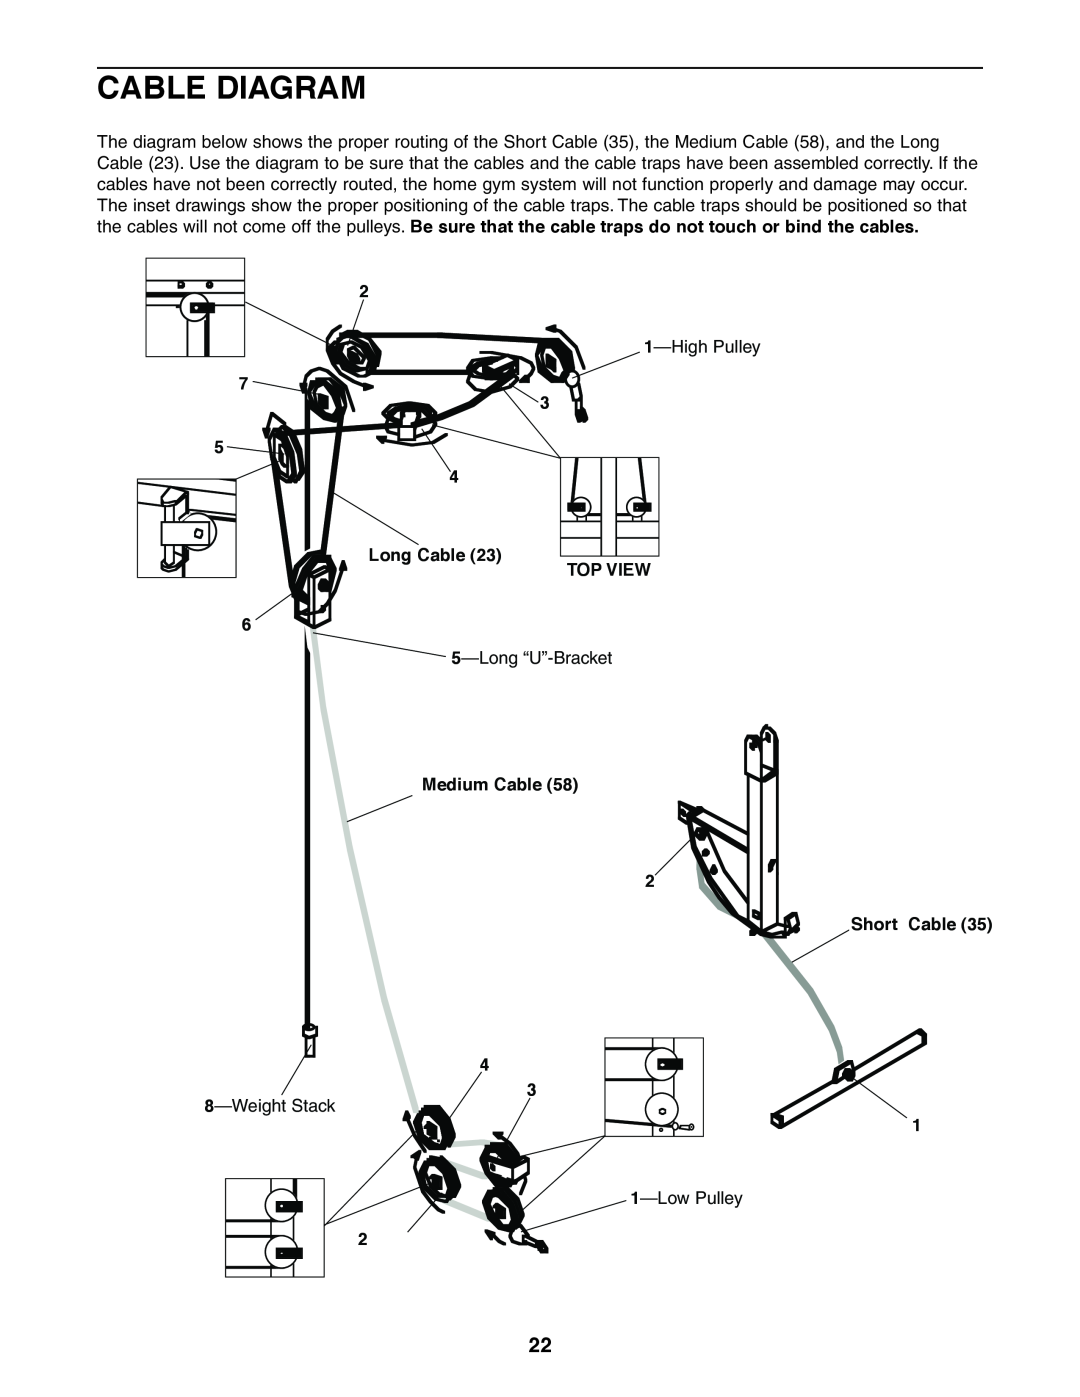 Sears 831.159460 user manual Cable Diagram, Long Cable TOP VIEW, Medium Cable, Short Cable 